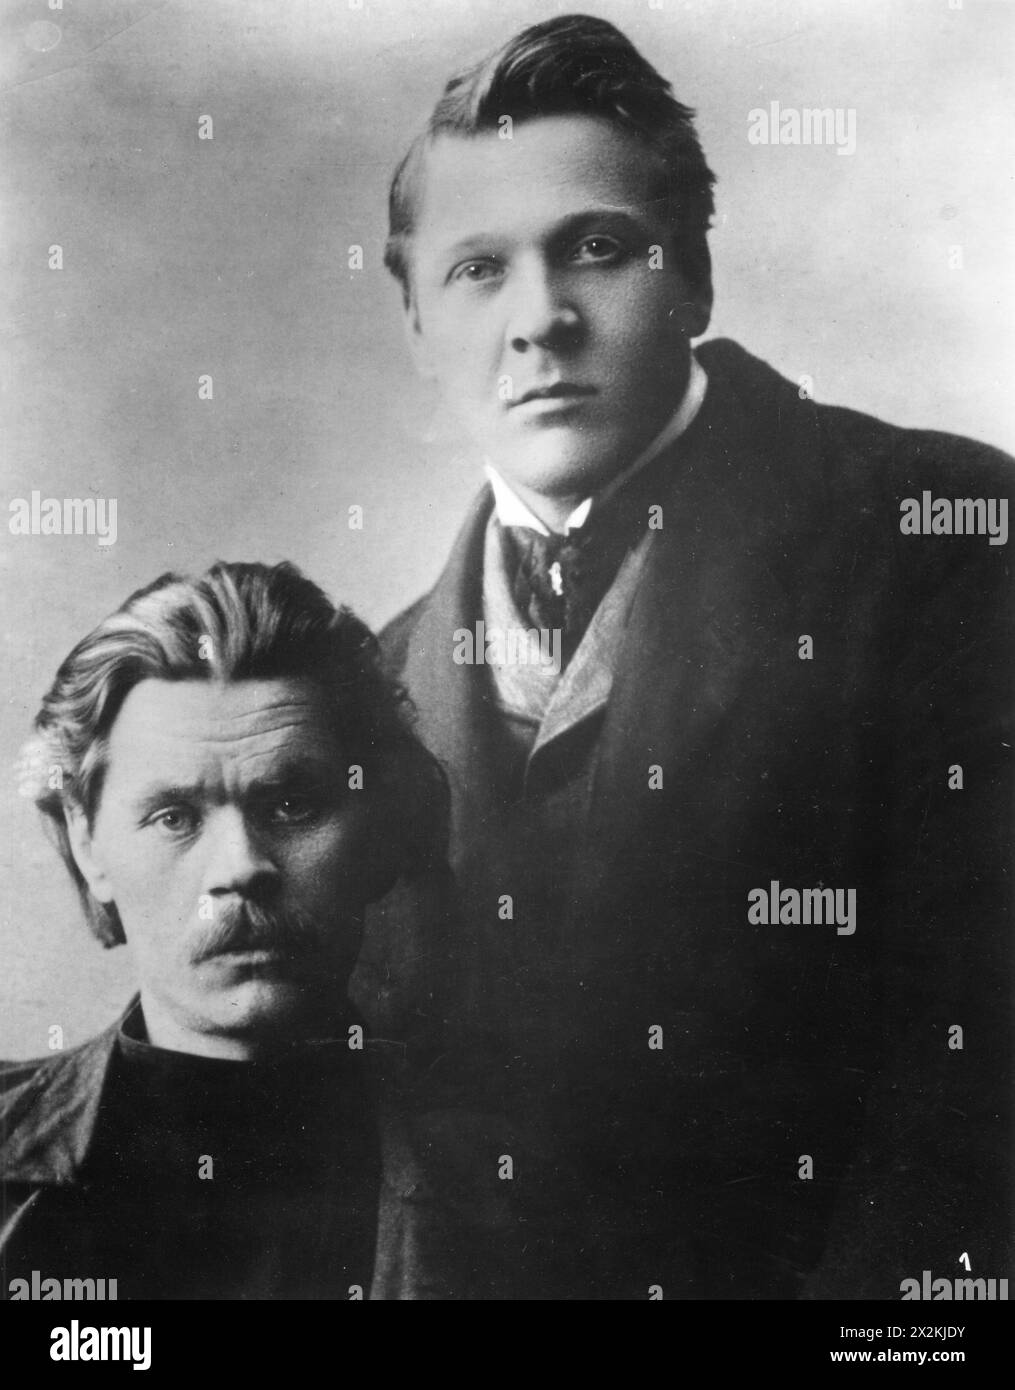 Chaliapin, Fjodor Ivanovich, 13.2.1873 - 12.4.1938, Russian opera singer (bass), with Maksim Gorky, ADDITIONAL-RIGHTS-CLEARANCE-INFO-NOT-AVAILABLE Stock Photo